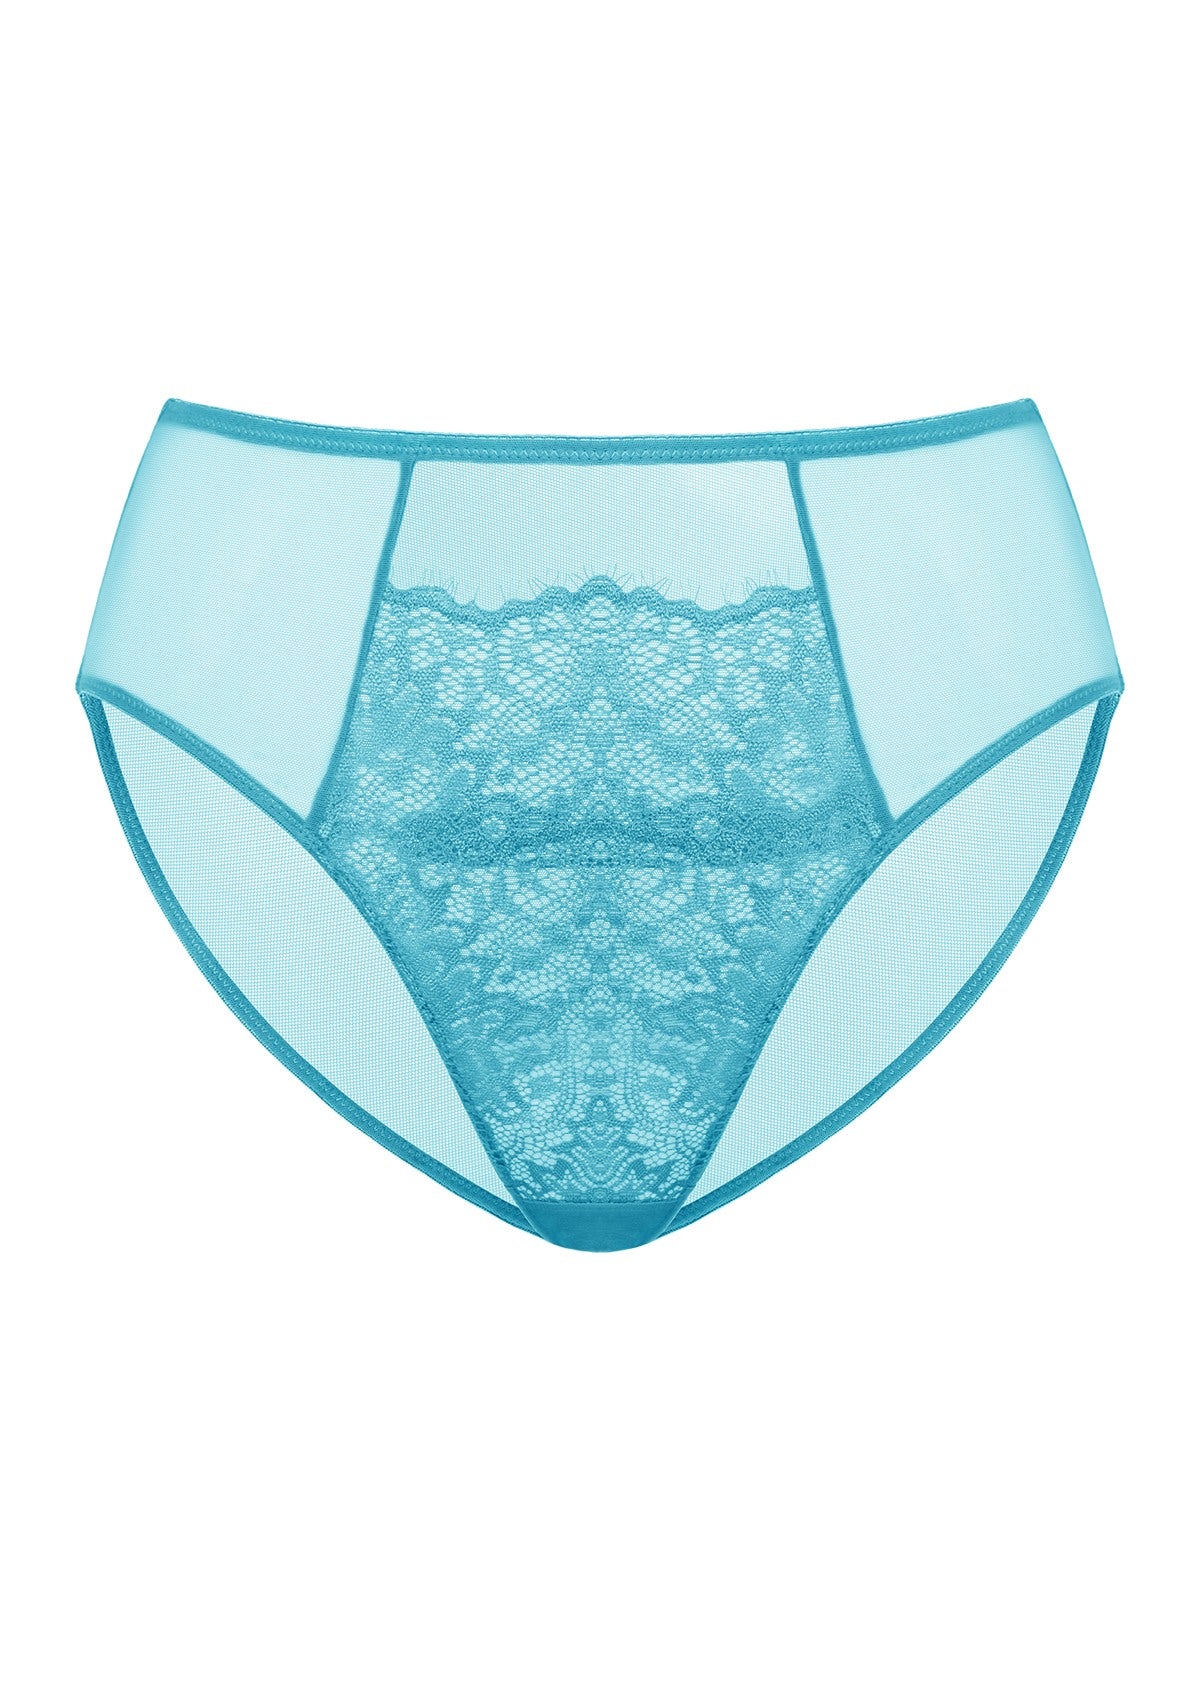 HSIA Spring Romance High-Rise Floral Lacy Panty-Comfort In Style - XL / Horizon Blue